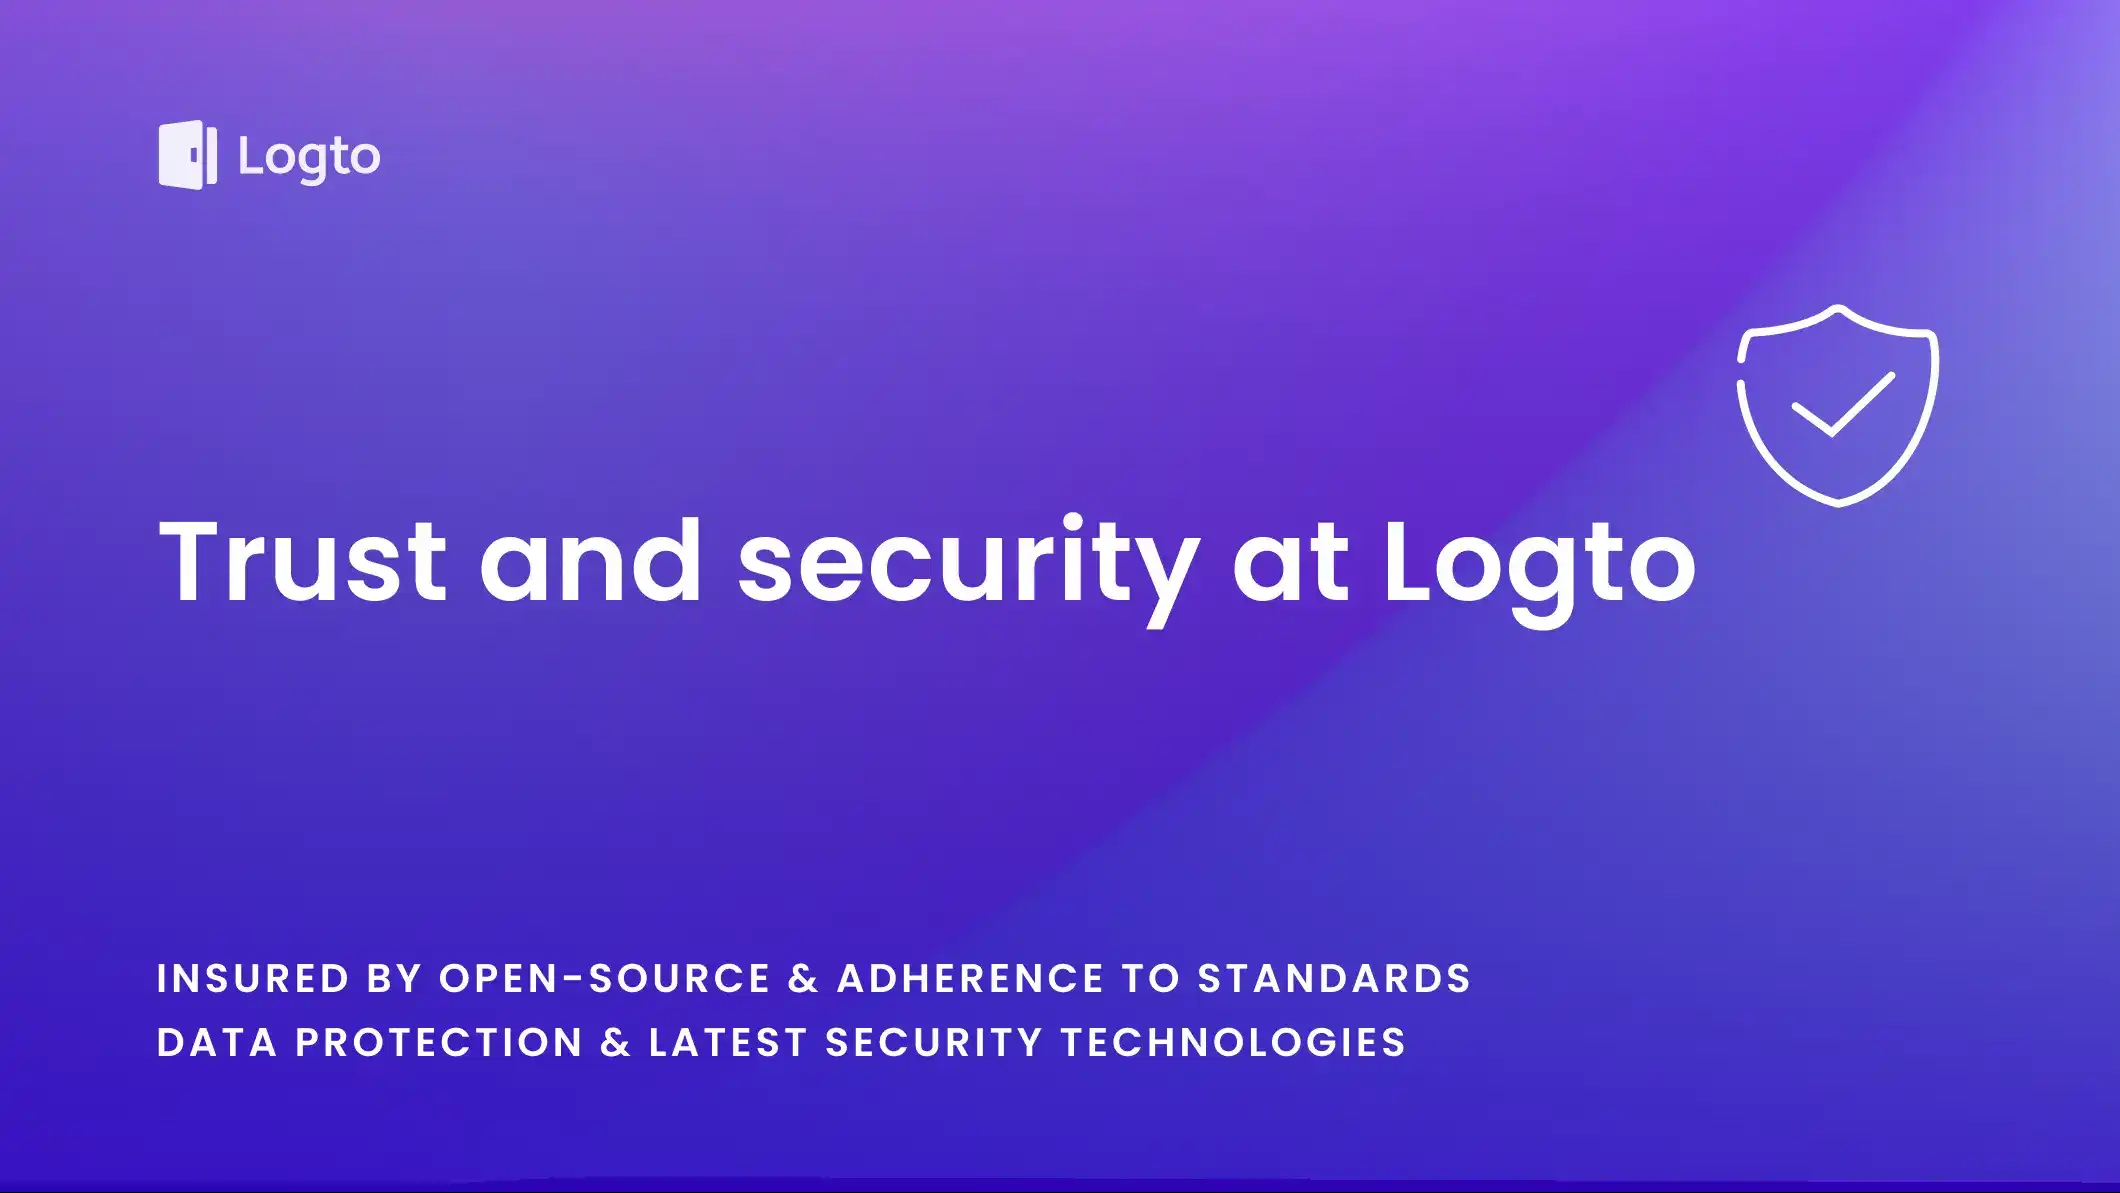 Trust and security at Logto